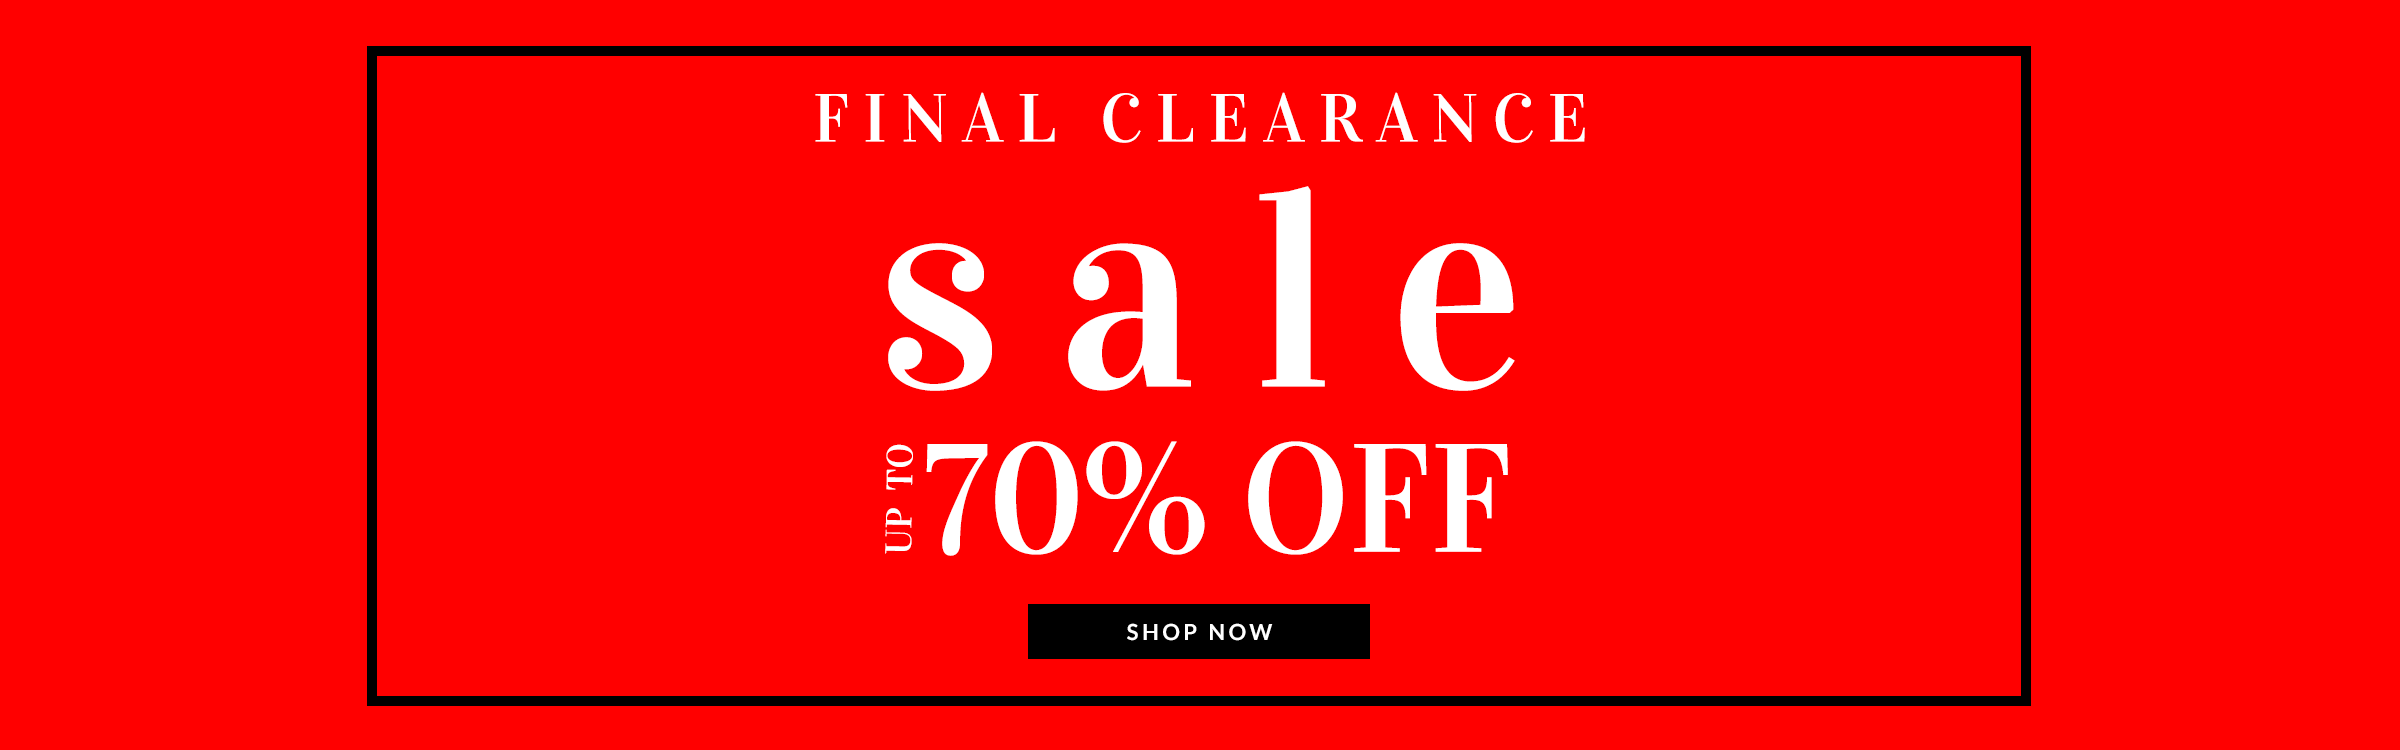 Wallis: Final Clearance Sale up to 70% off women's clothing